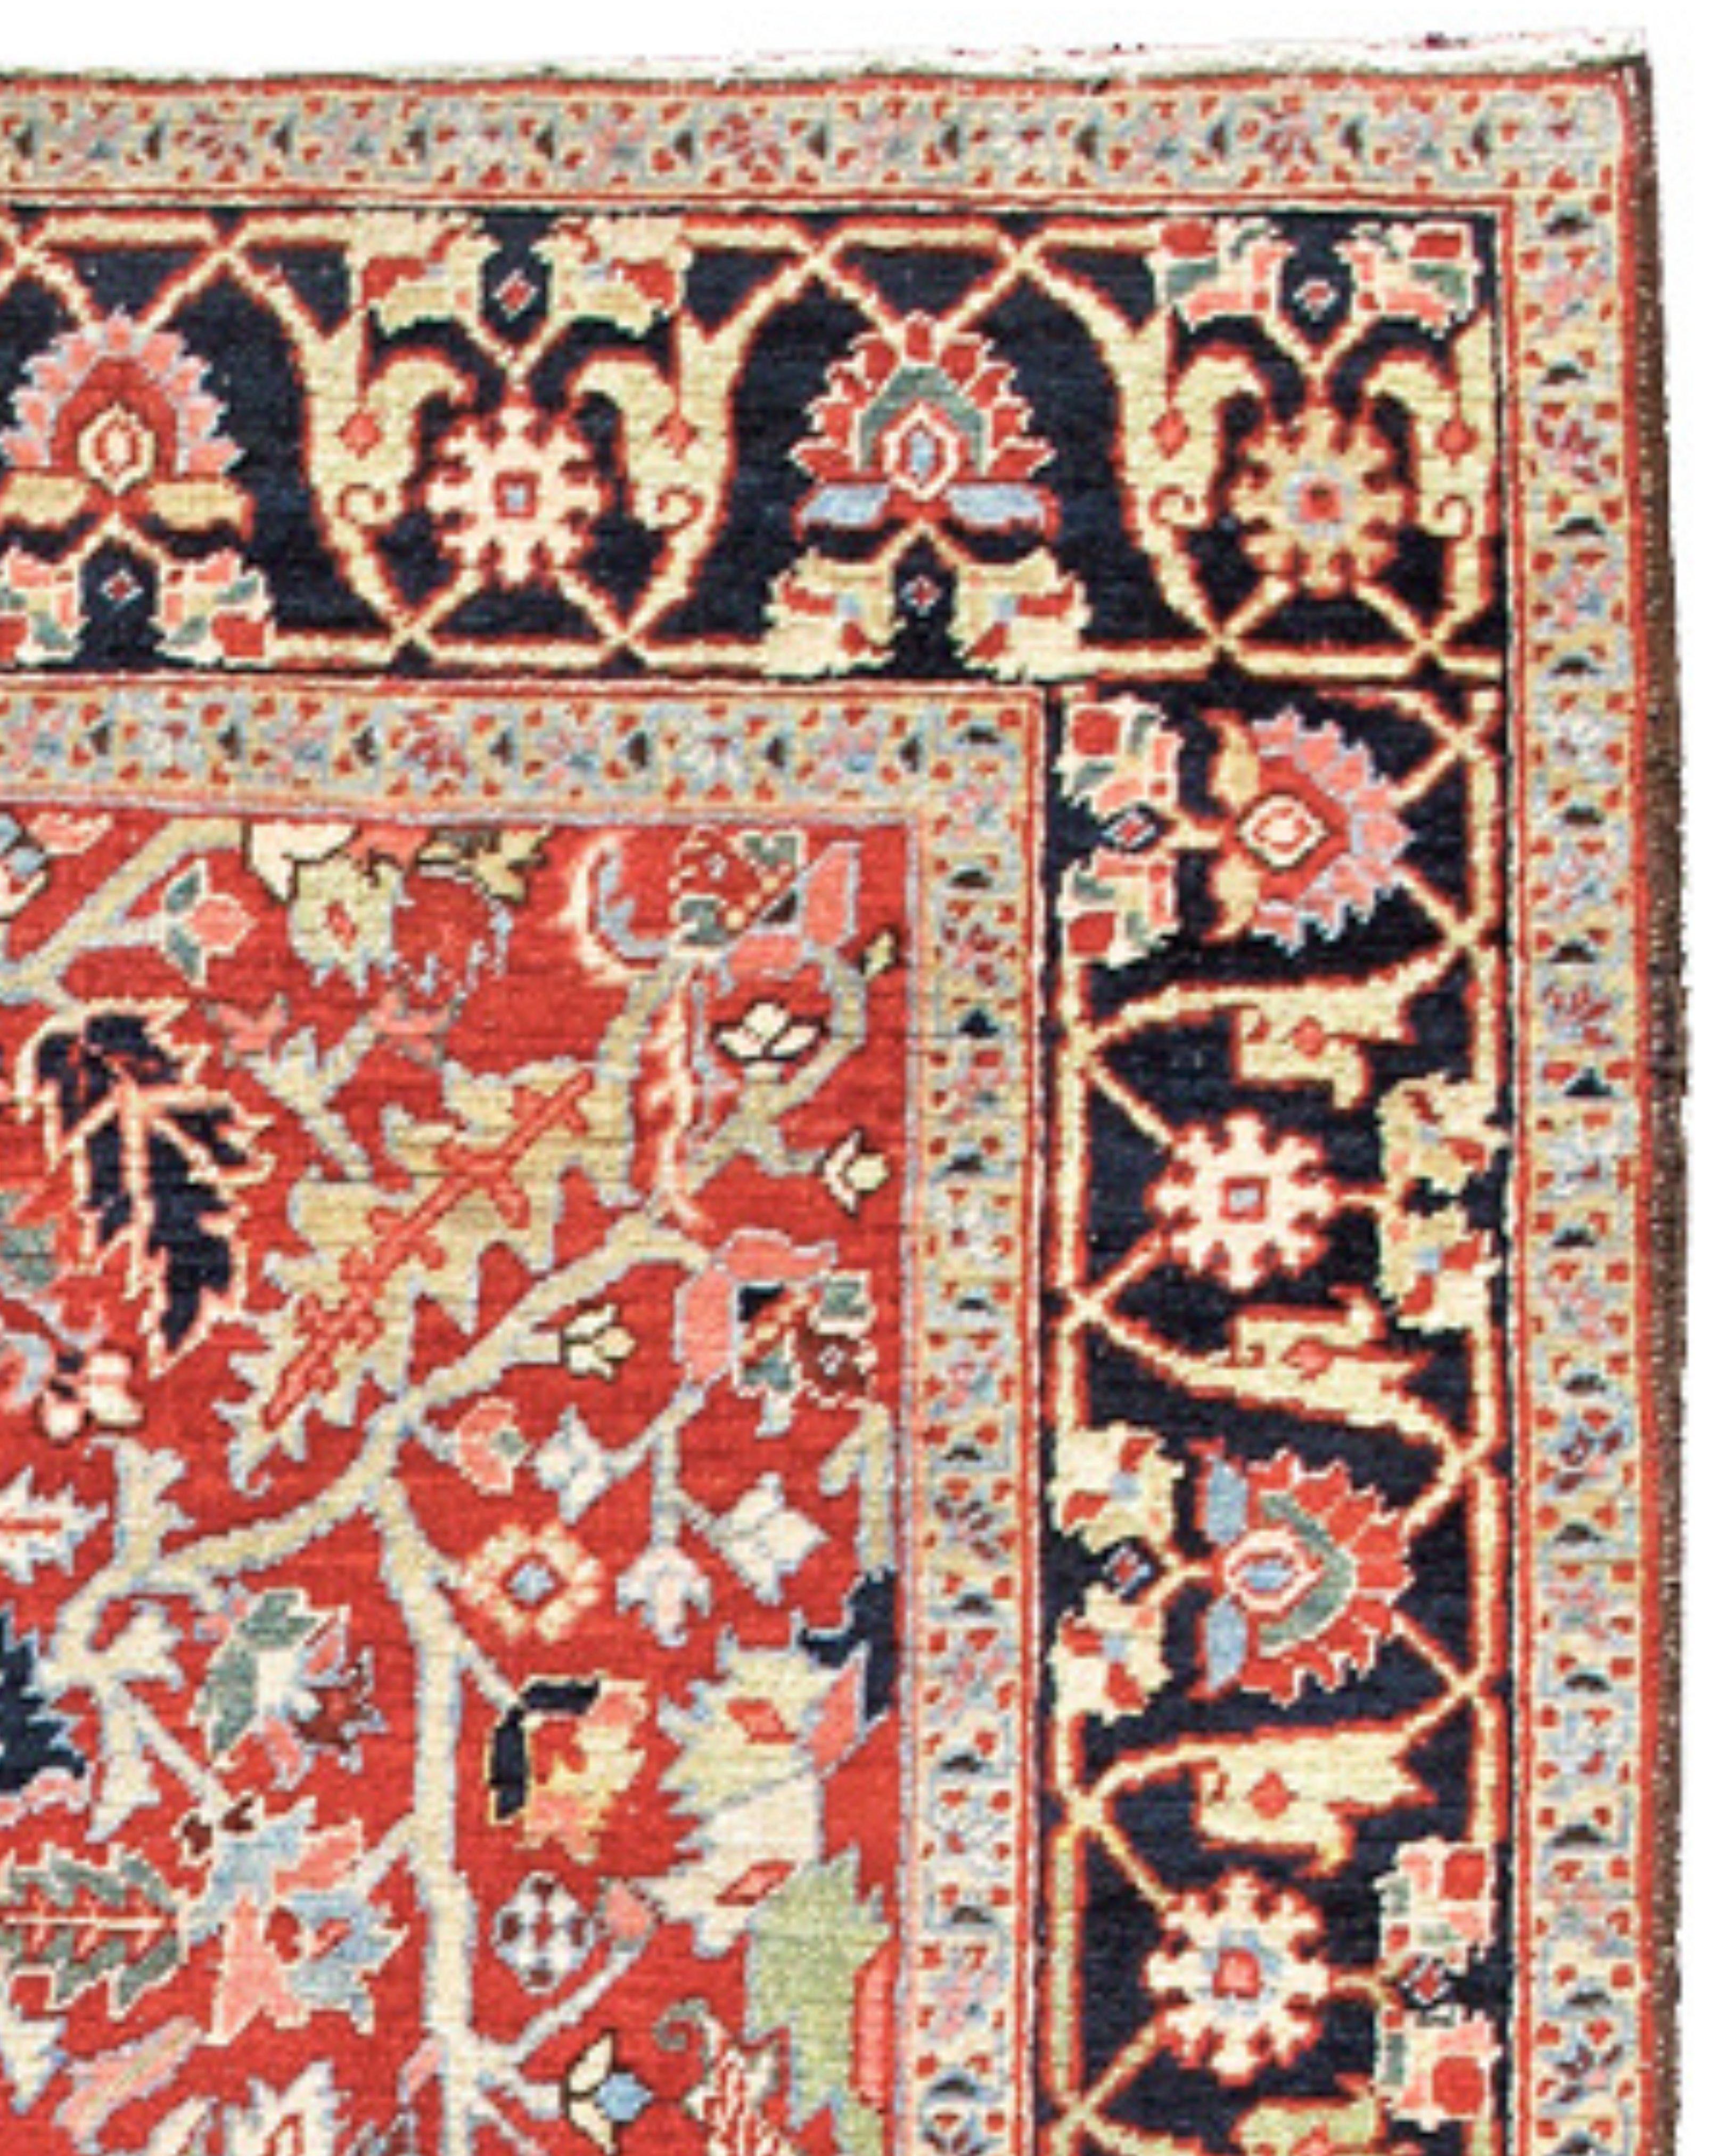 Antique Persian Heriz Rug, Early 20th Century

Additional information:
Dimensions: 4'8